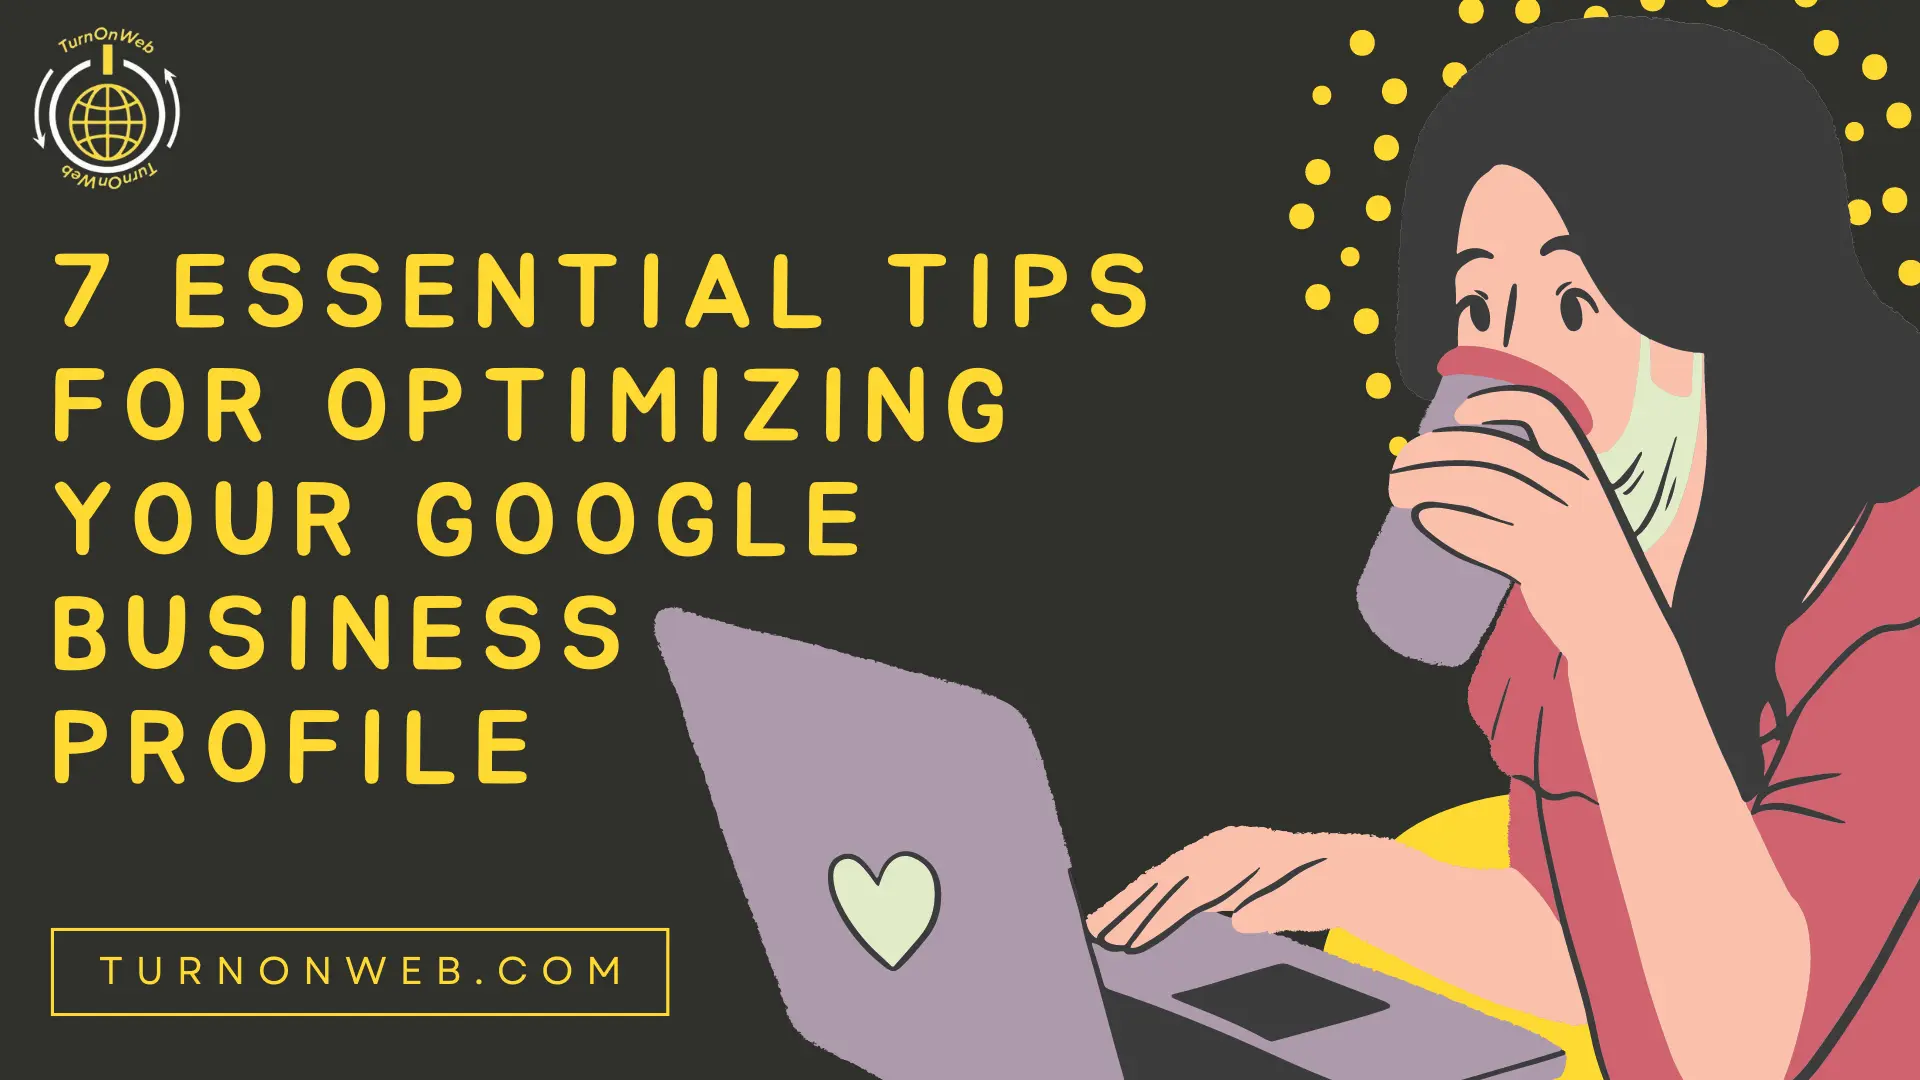 7 Essential Tips for Optimizing Your Google Business Profile